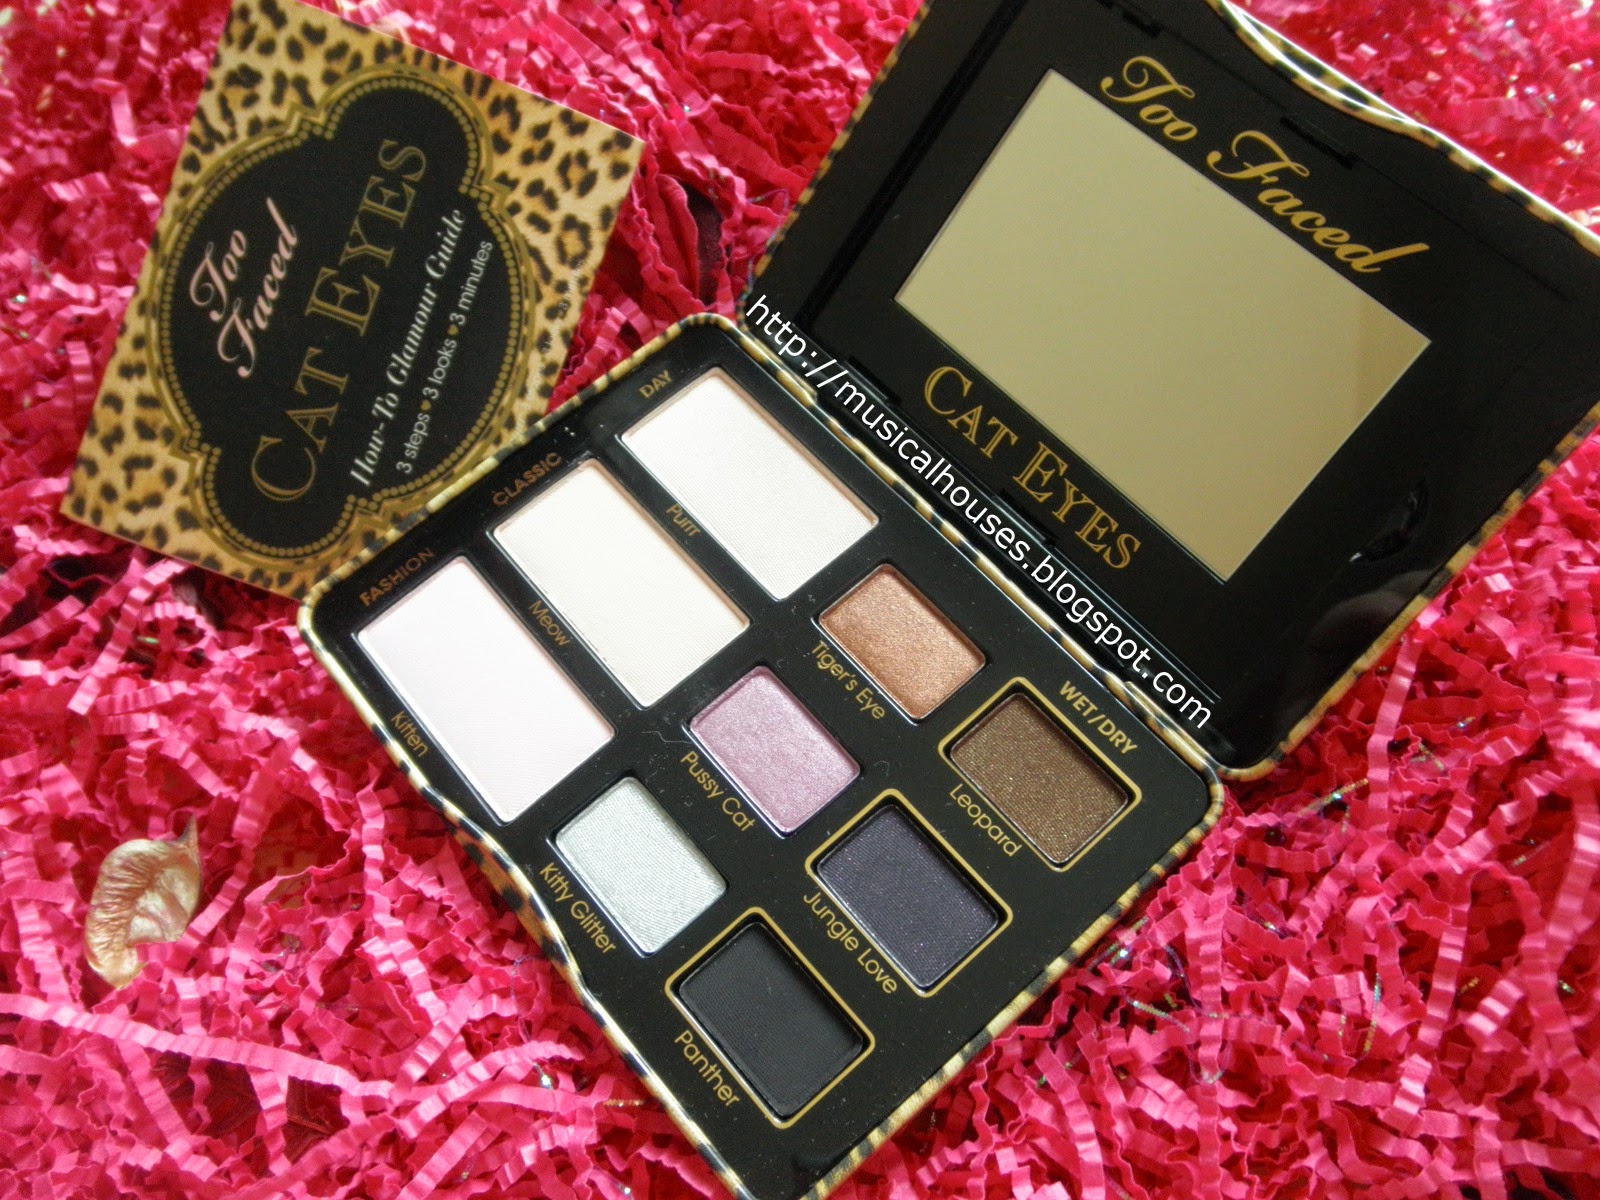 Too Faced Cat Eyes Eyeshadow Palette Swatches and Review - of